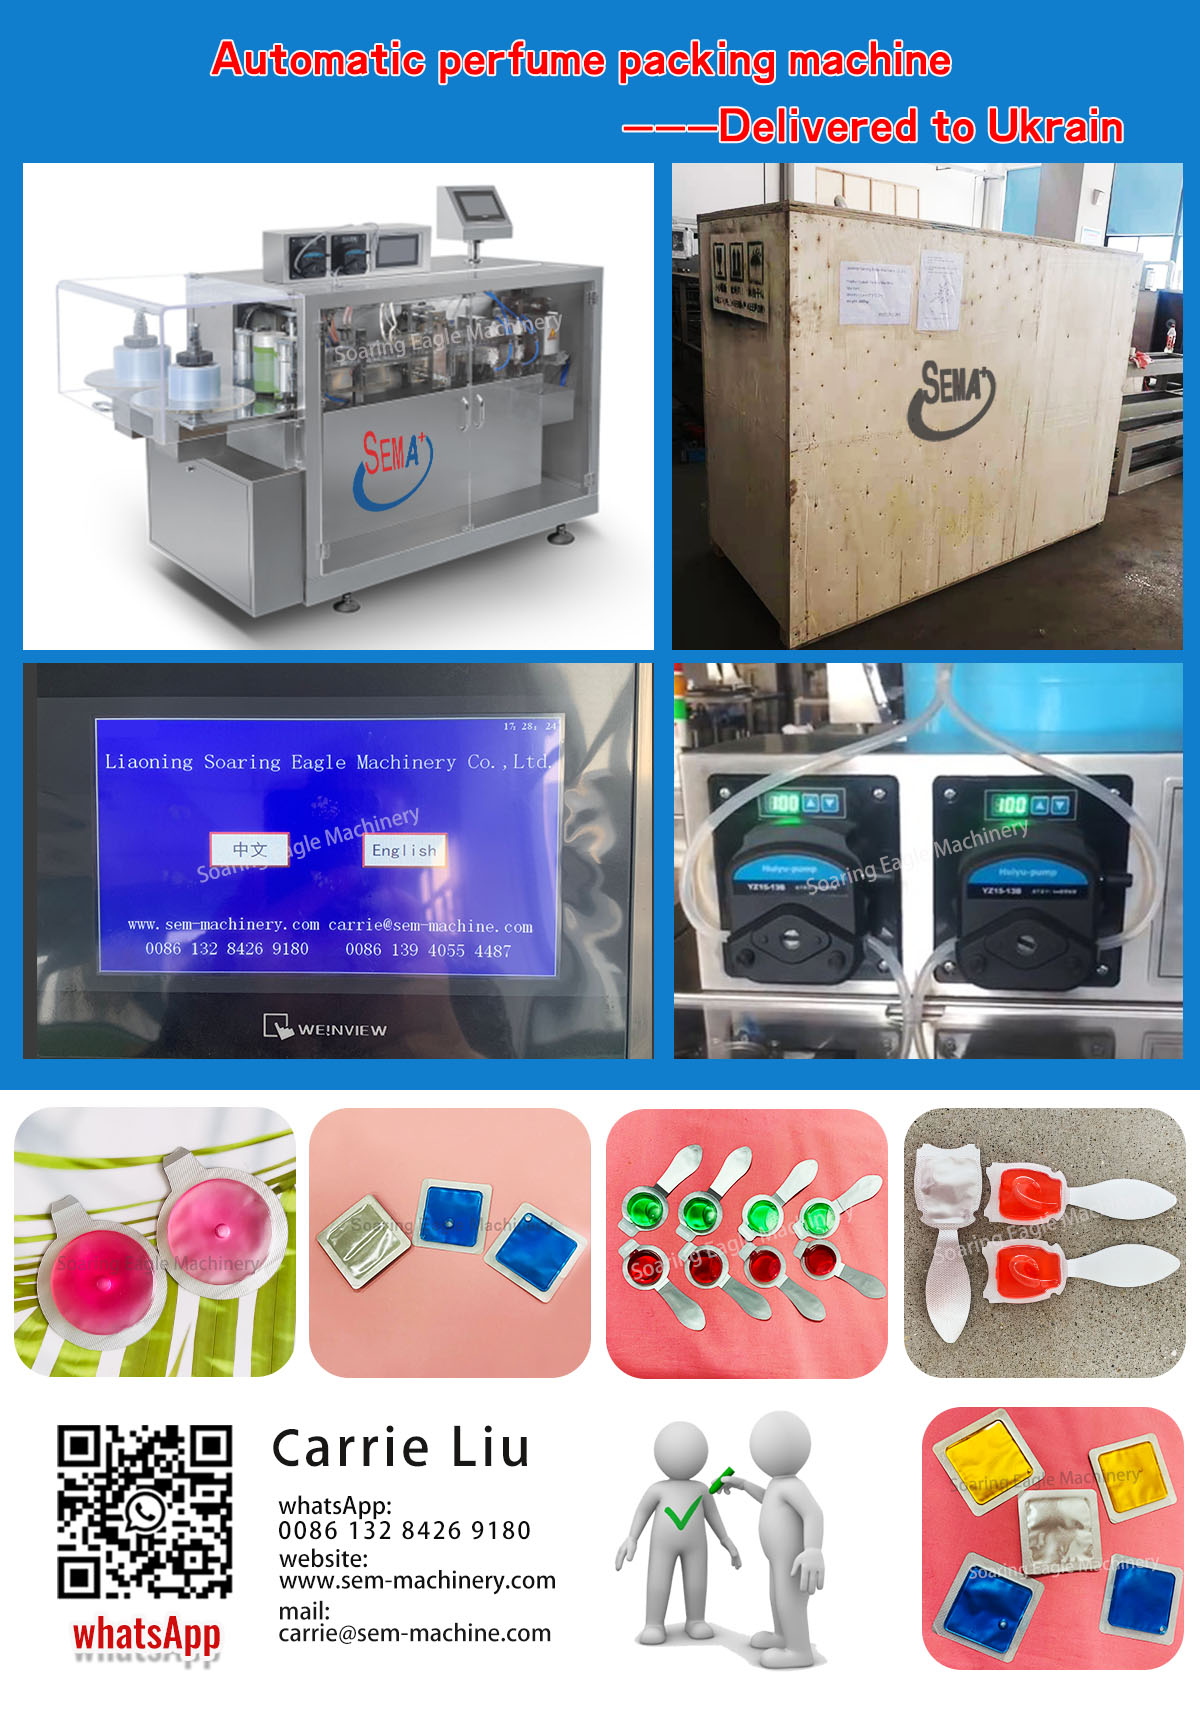 The equipment is a liquid packaging machine,and the product is pesticide.